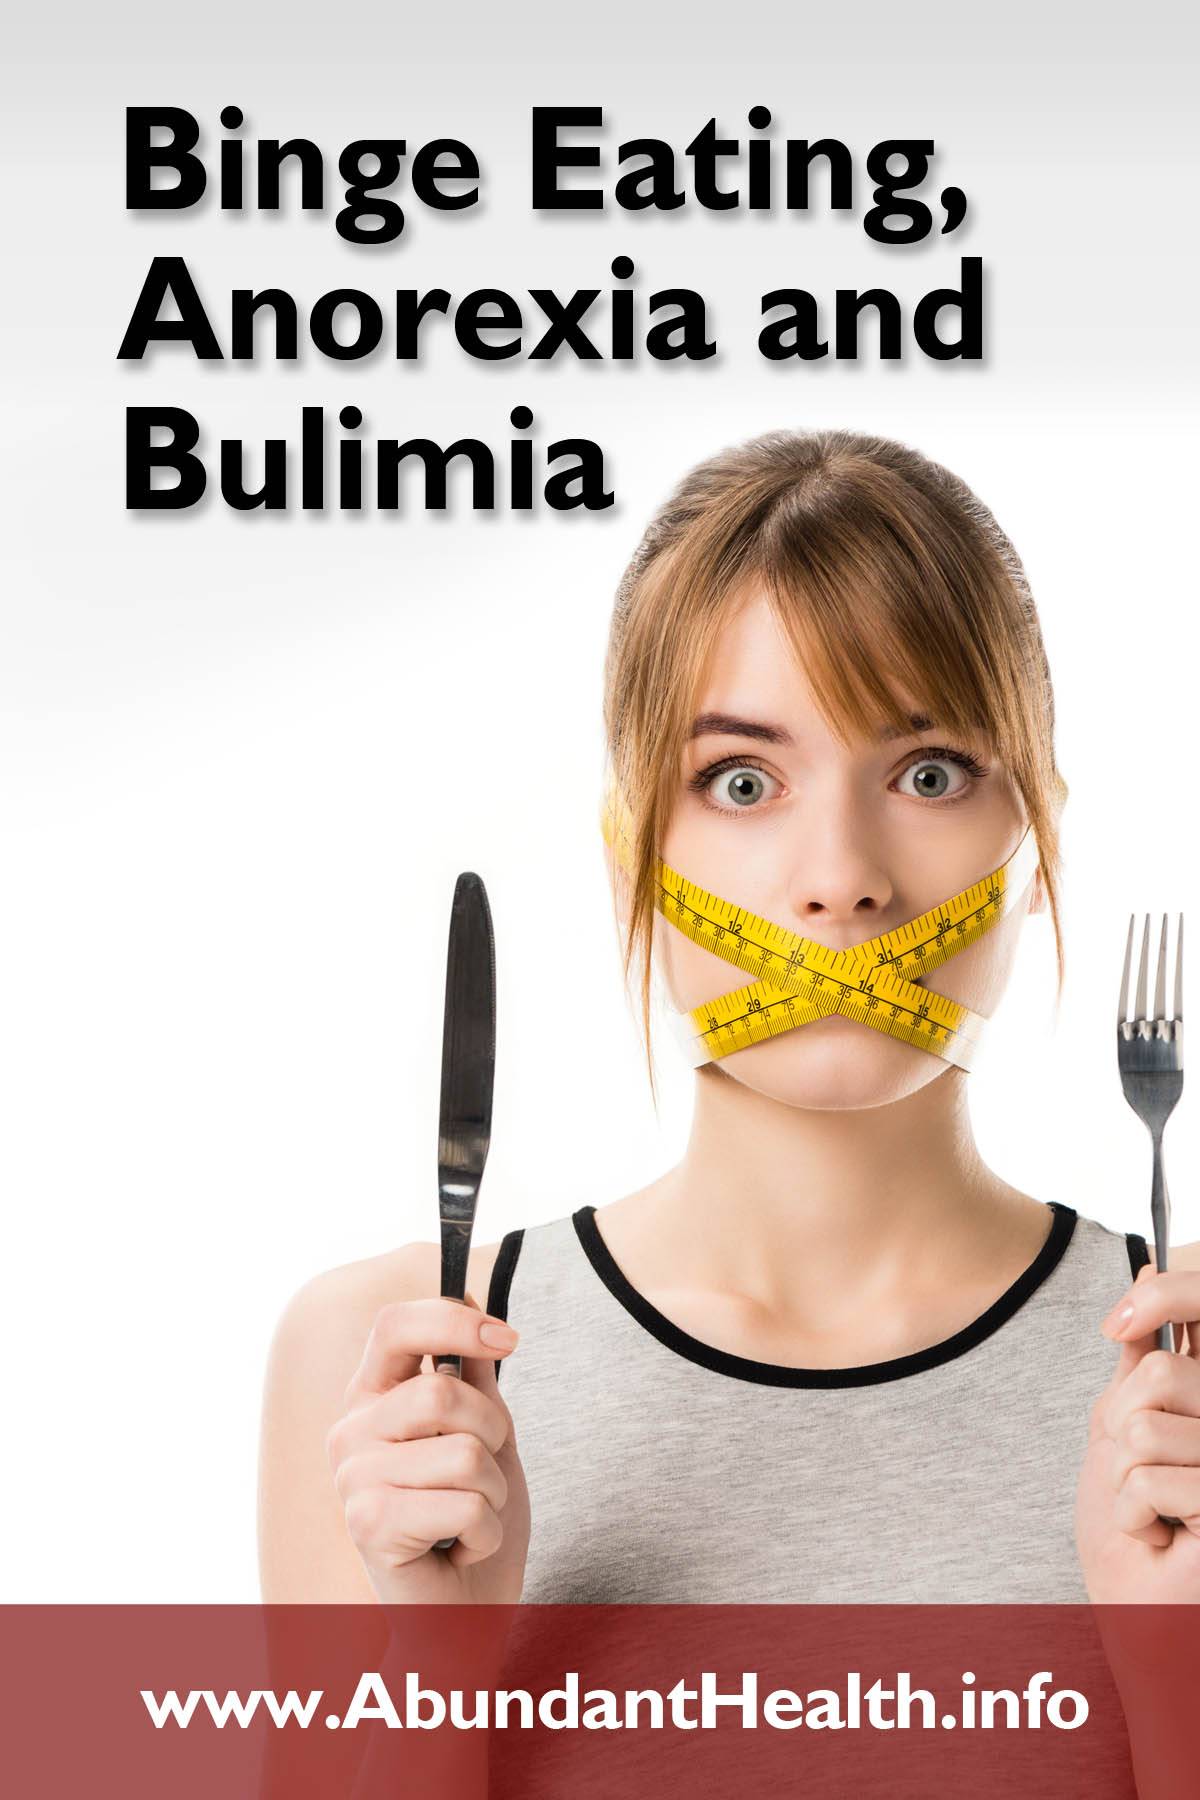 Binge Eating, Anorexia and Bulimia